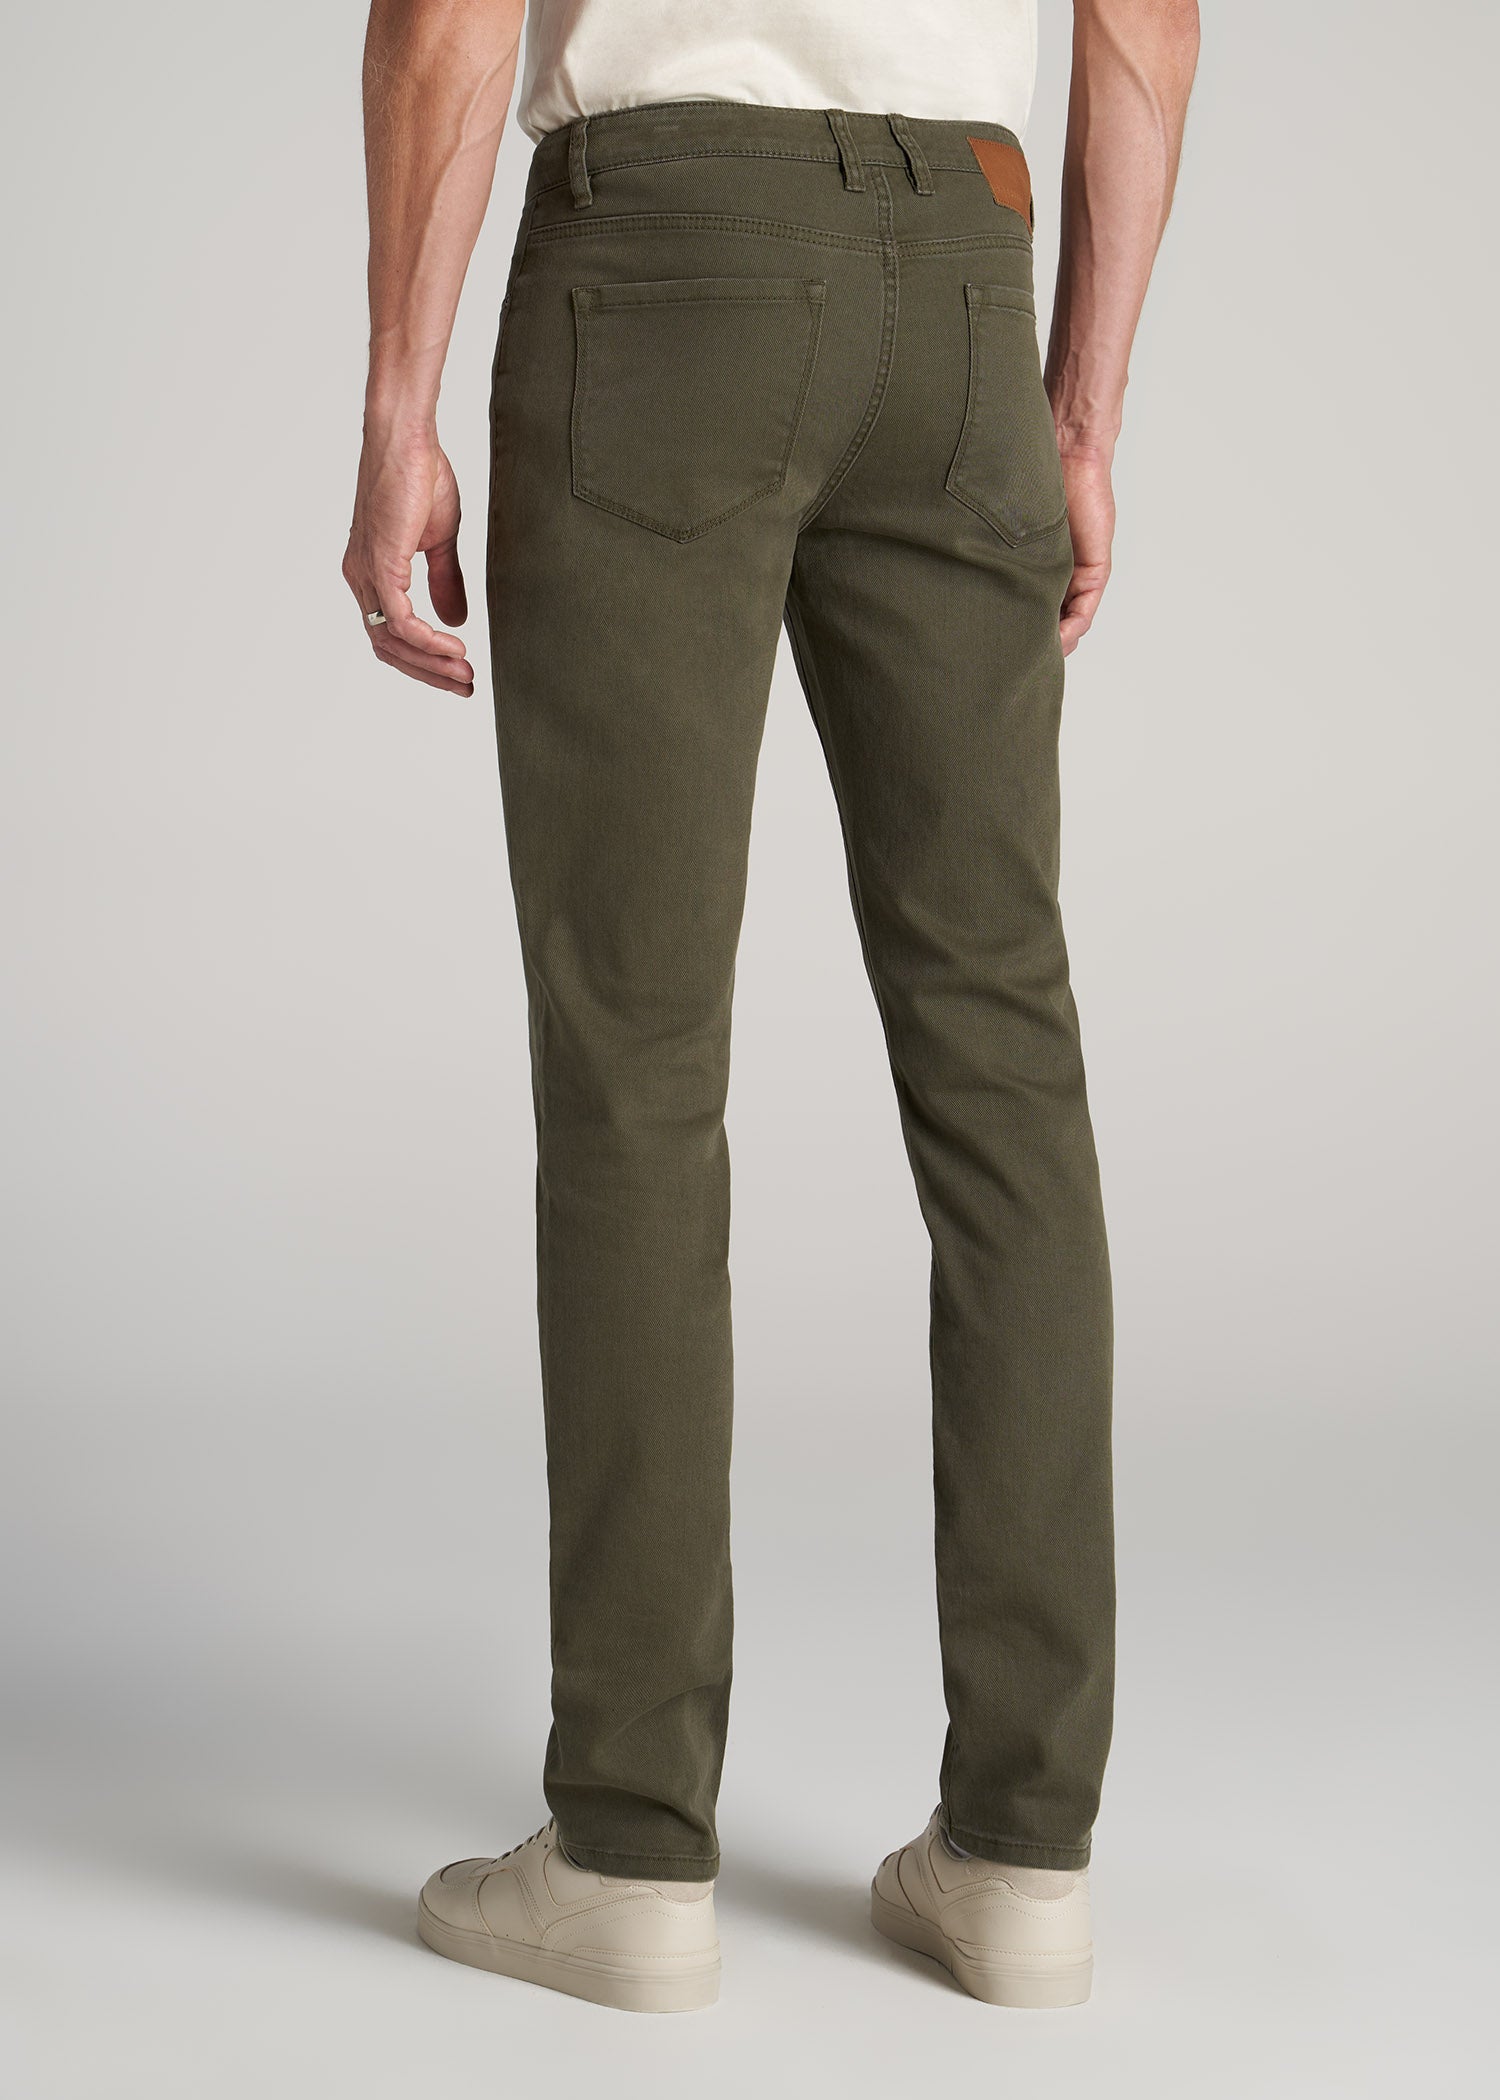 Dylan SLIM-FIT Jeans for Tall Men in Olive Green Wash